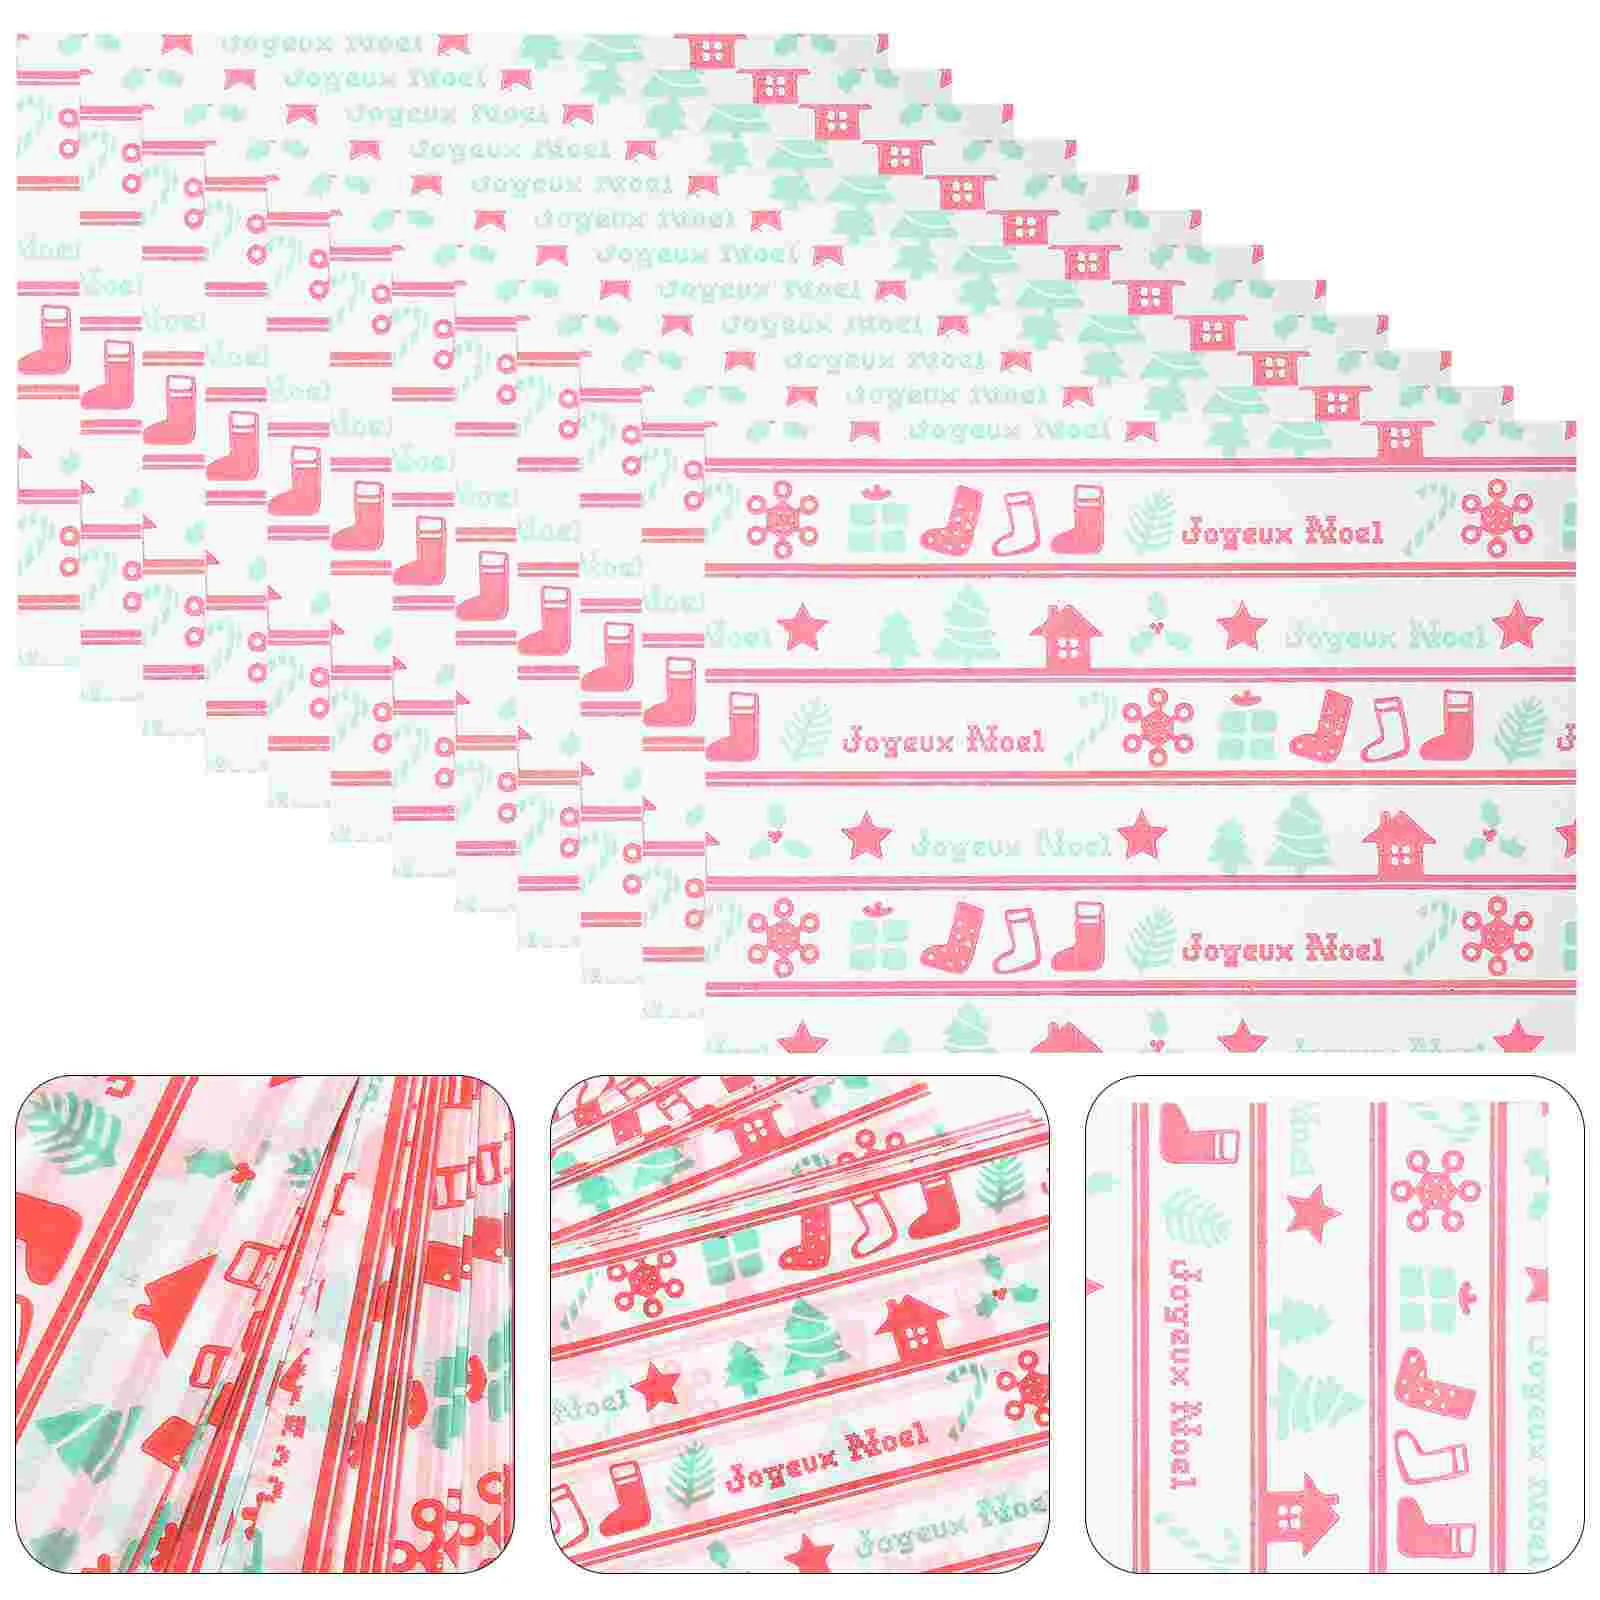 

500 Sheets Christmas Treats Wrapper Christmas Sweets Wrappers Nougat Packing Paper Chocolate Wrappers Candy Wrapping Paper